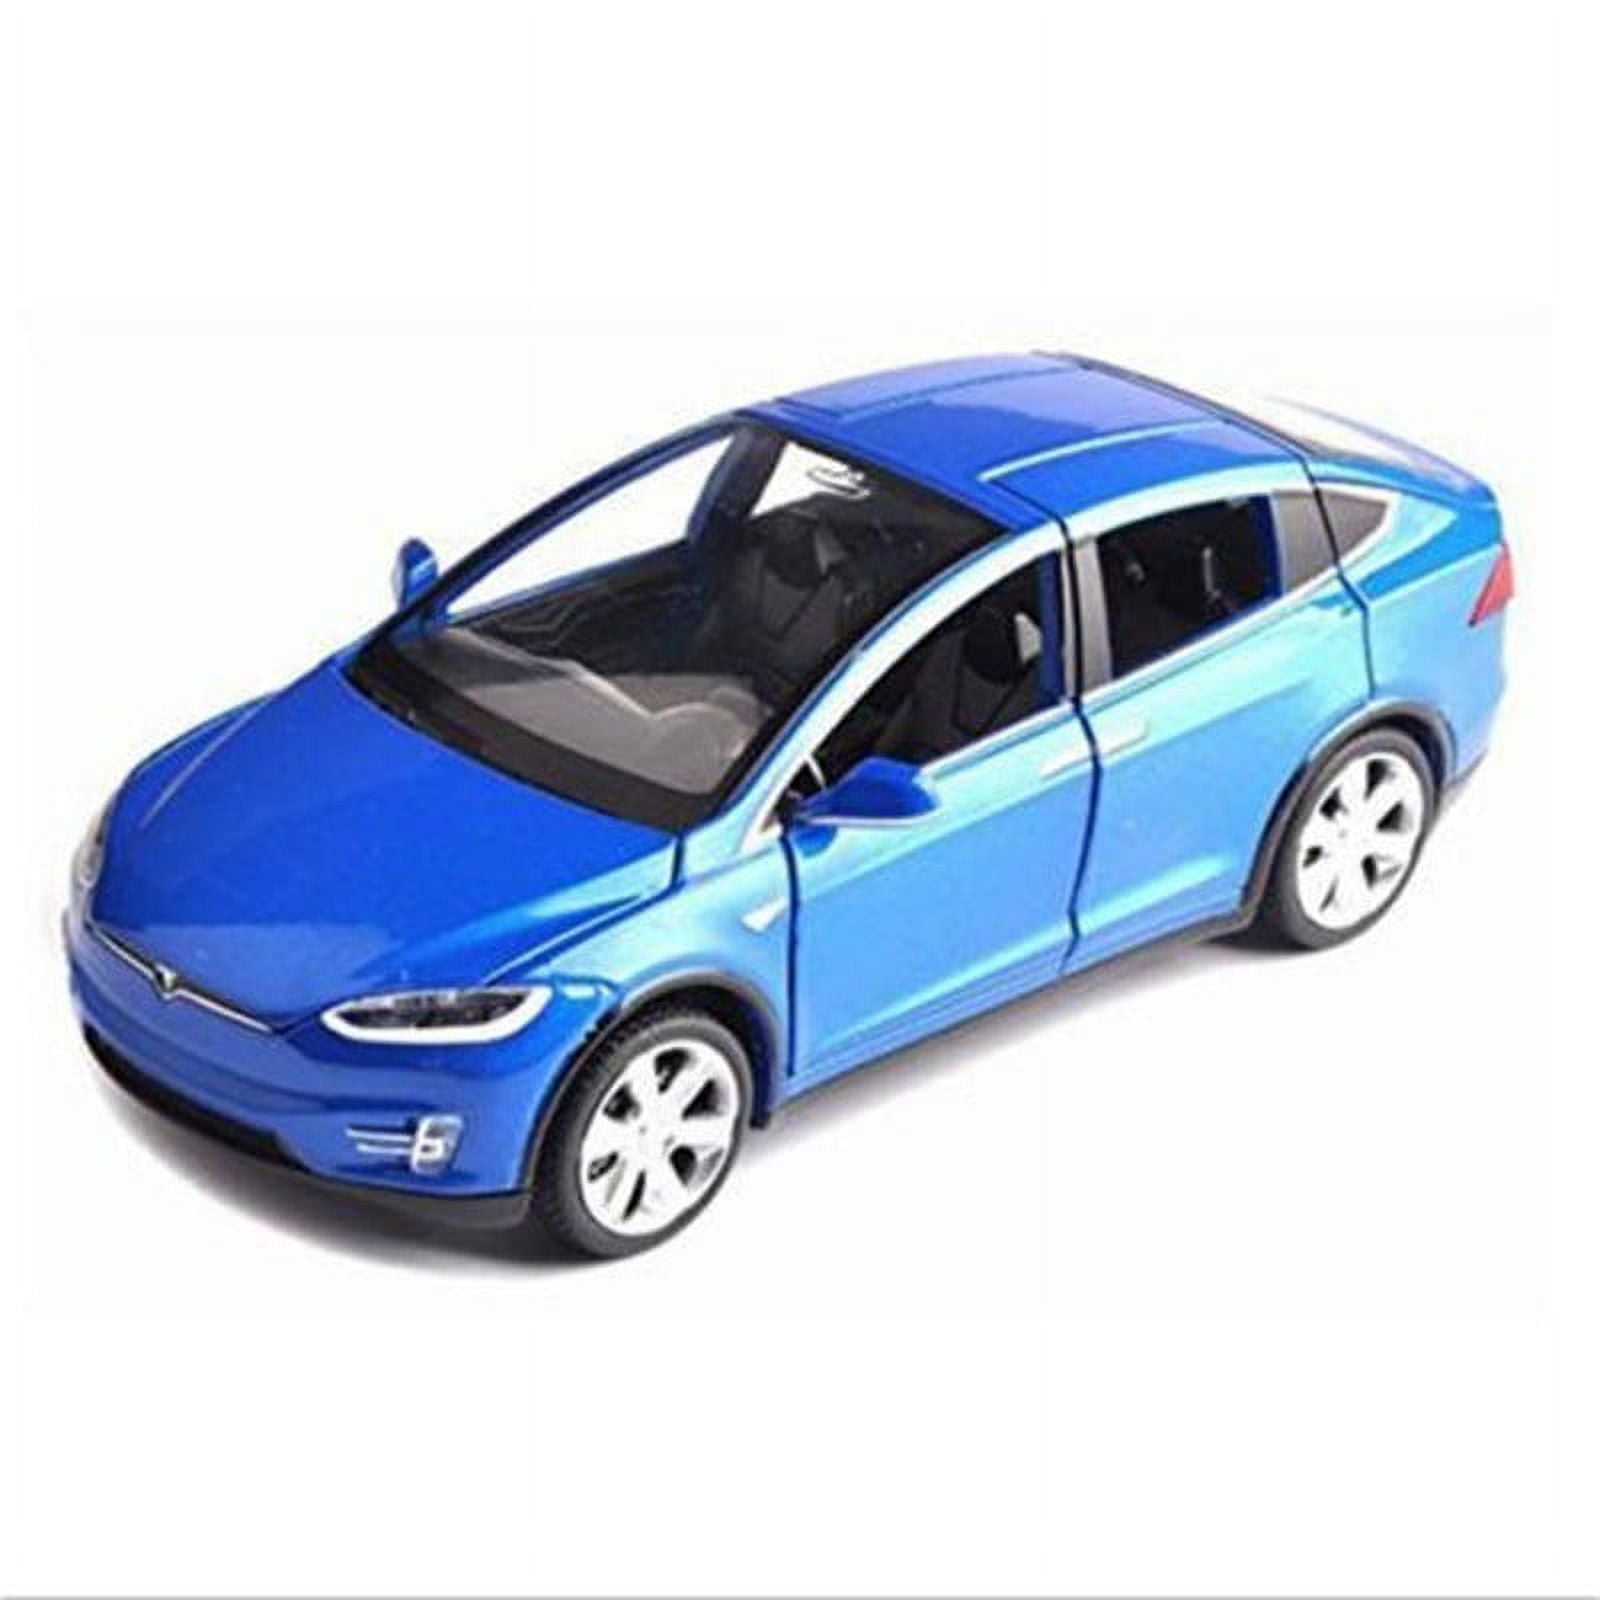 1/32 Tesla Model Y SUV Toy Car Model Diecast Alloy Metal Miniature Sound &  Light Pull Back 1:32 Collection Gift For Boy Children - AliExpress